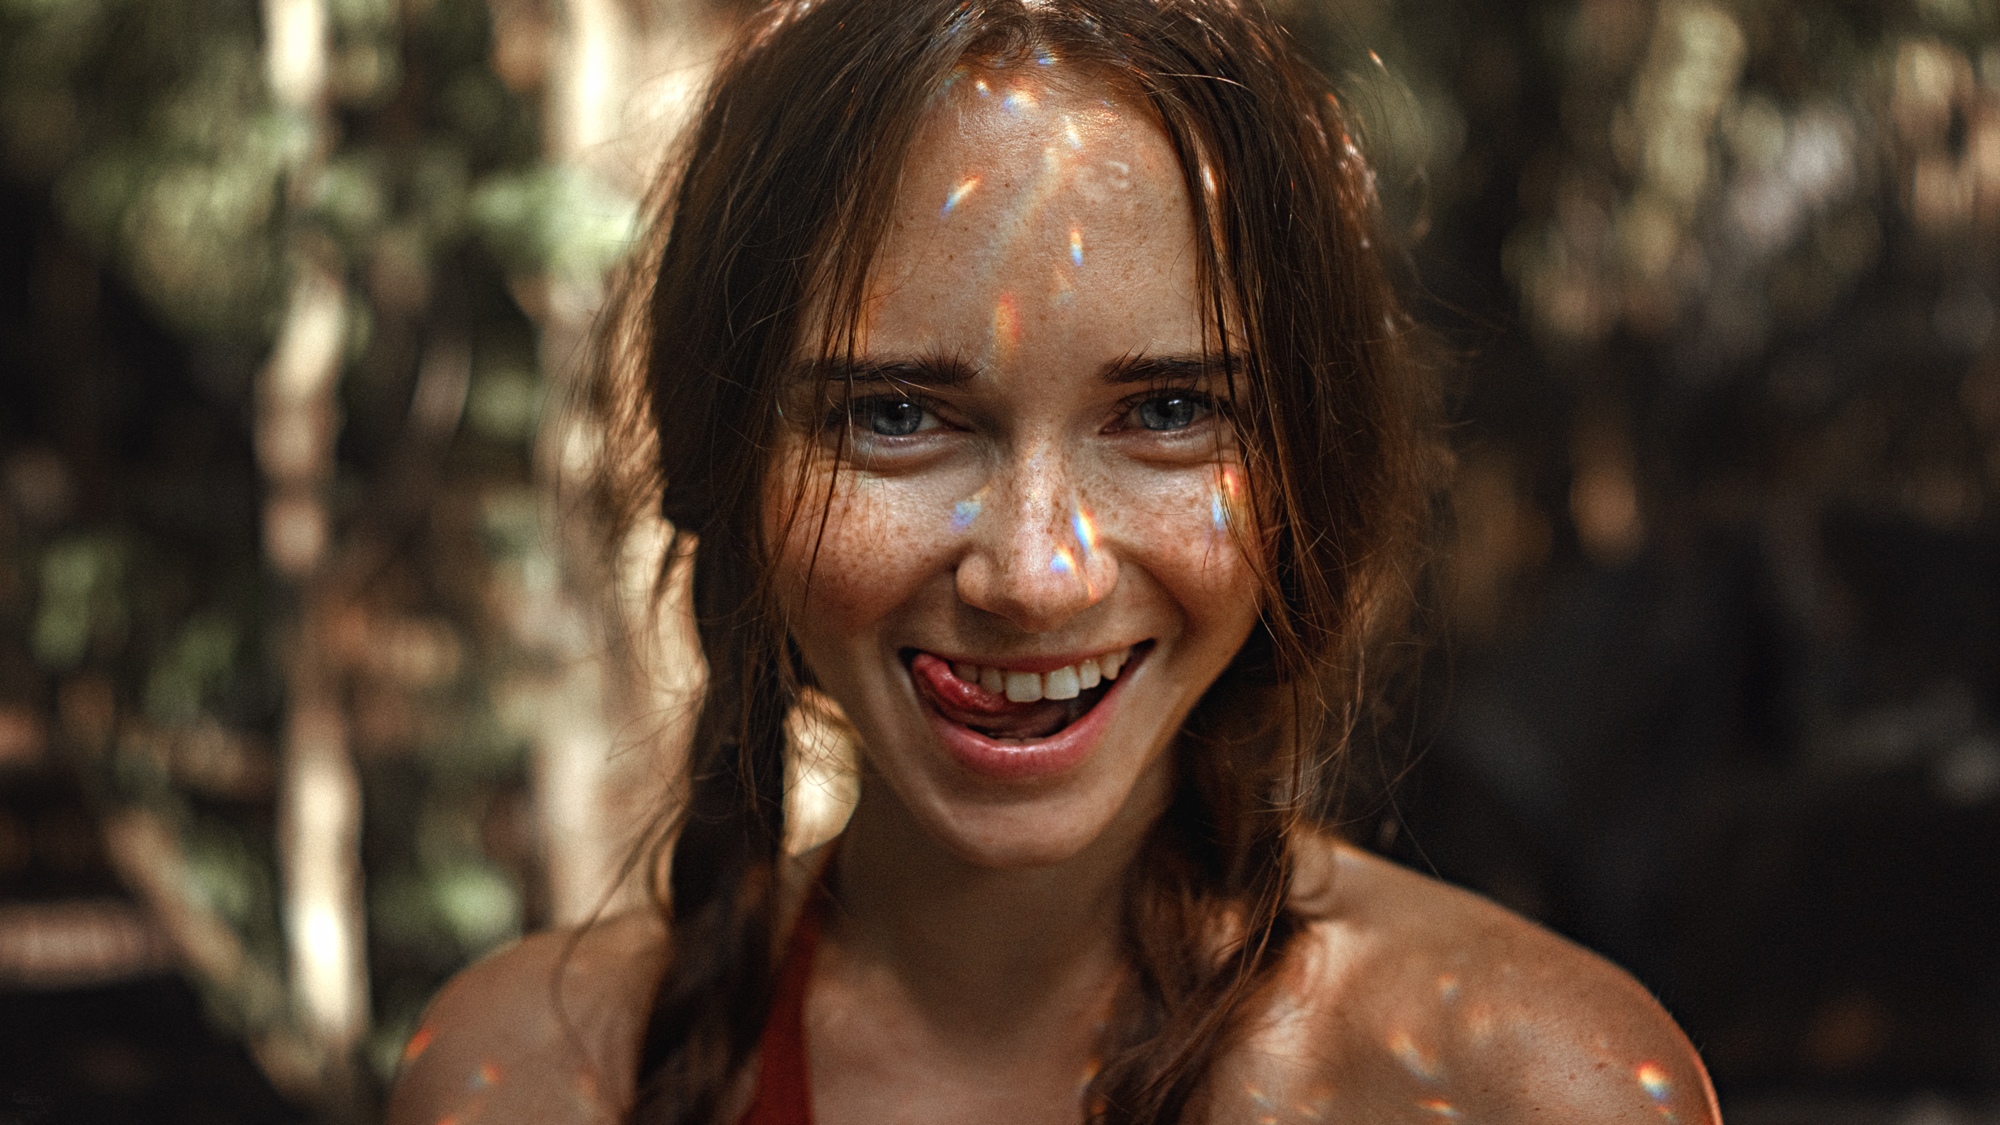 Women Model Face Women Outdoors Tongue Out Smiling Freckles Looking At Viewer Wallpaper 